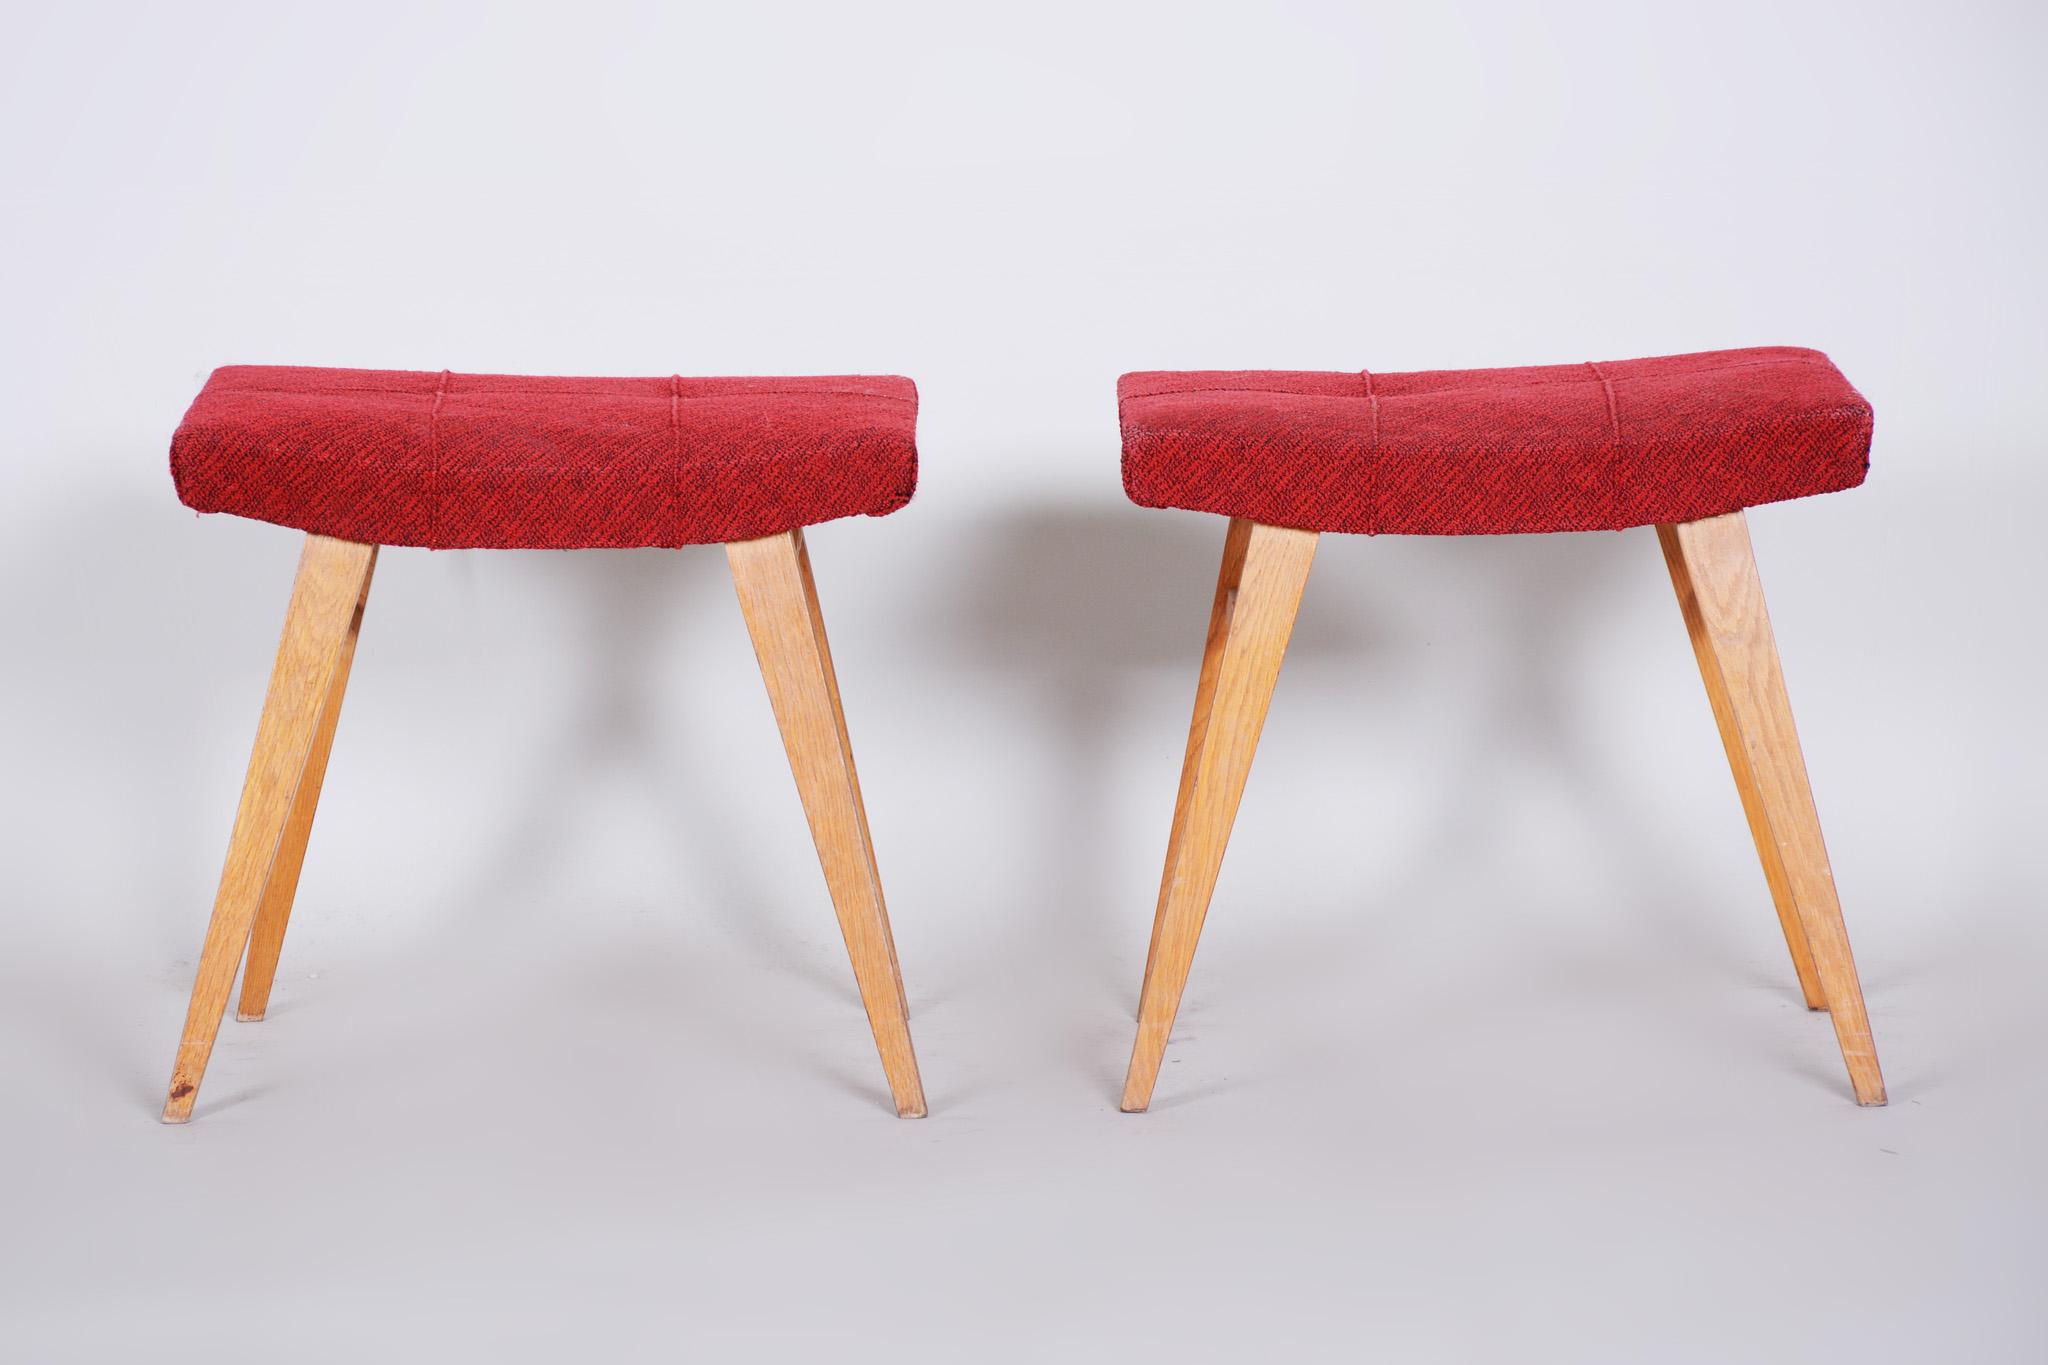 Mid-Century Modern Pair of Midcentury Red Beech Stools, 1960s, Original Preserved Condition For Sale